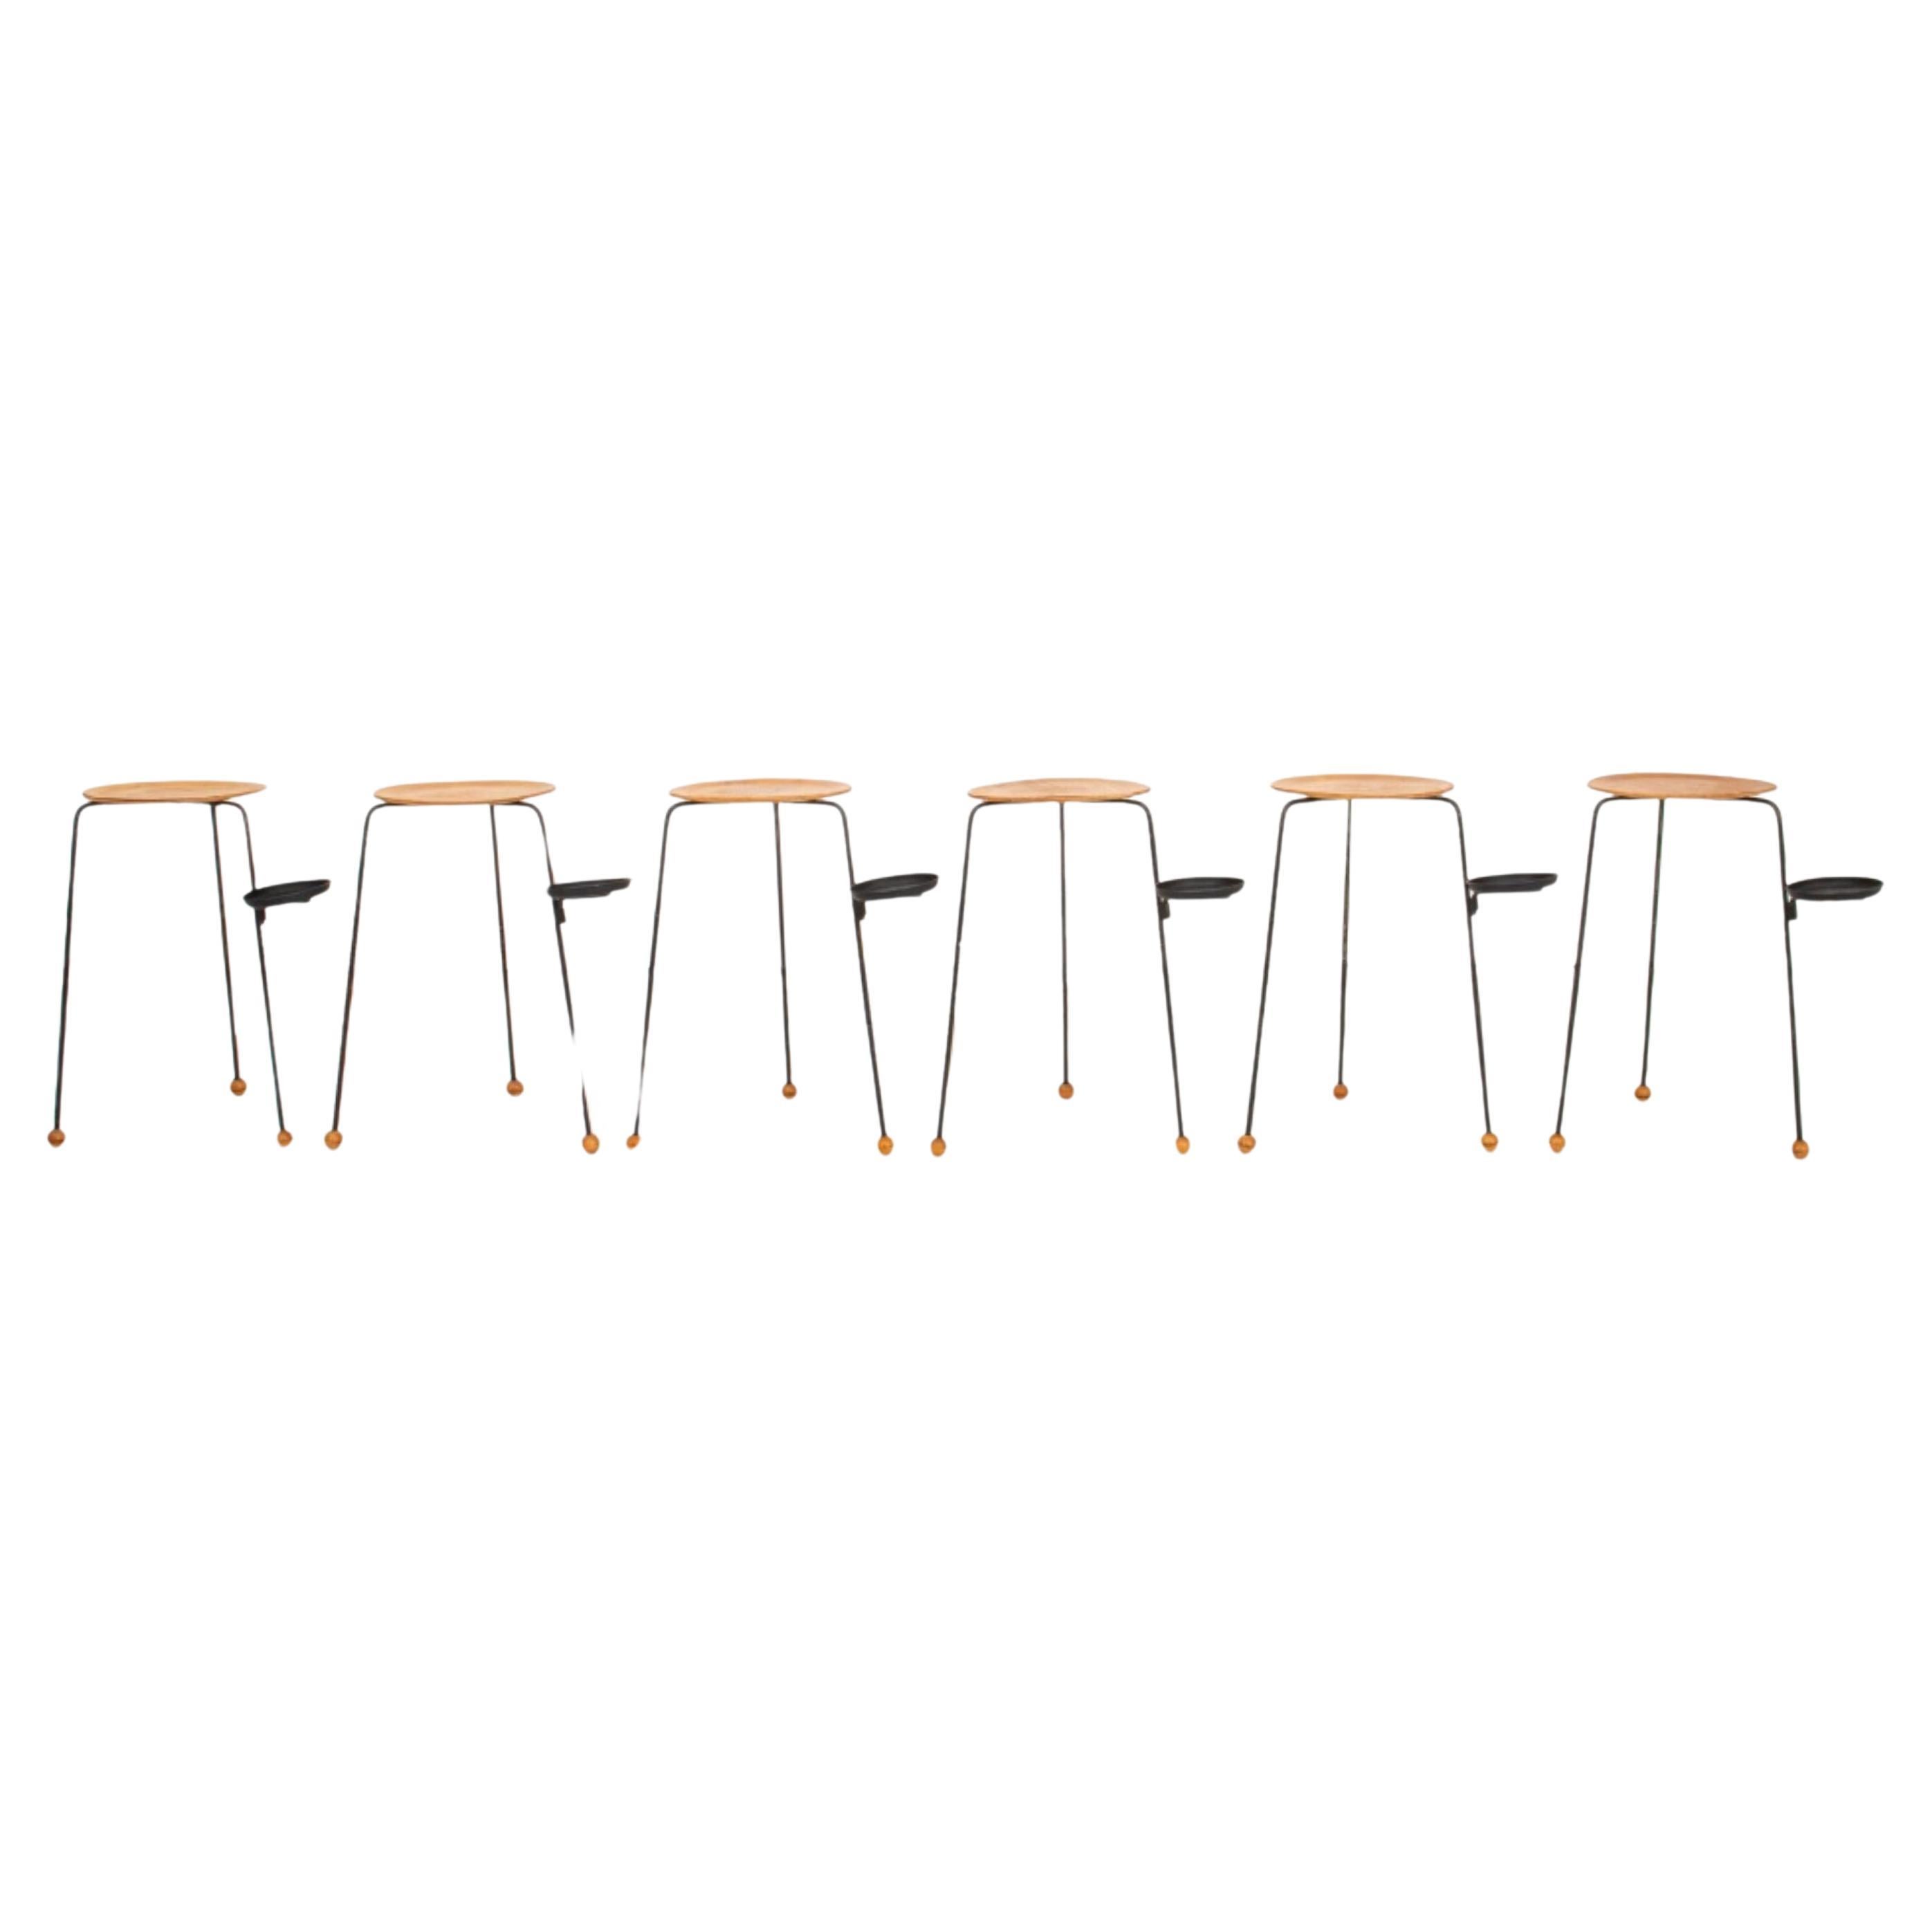 Tony Paul Attr. "Tempo" Stacking Side Tables, 6